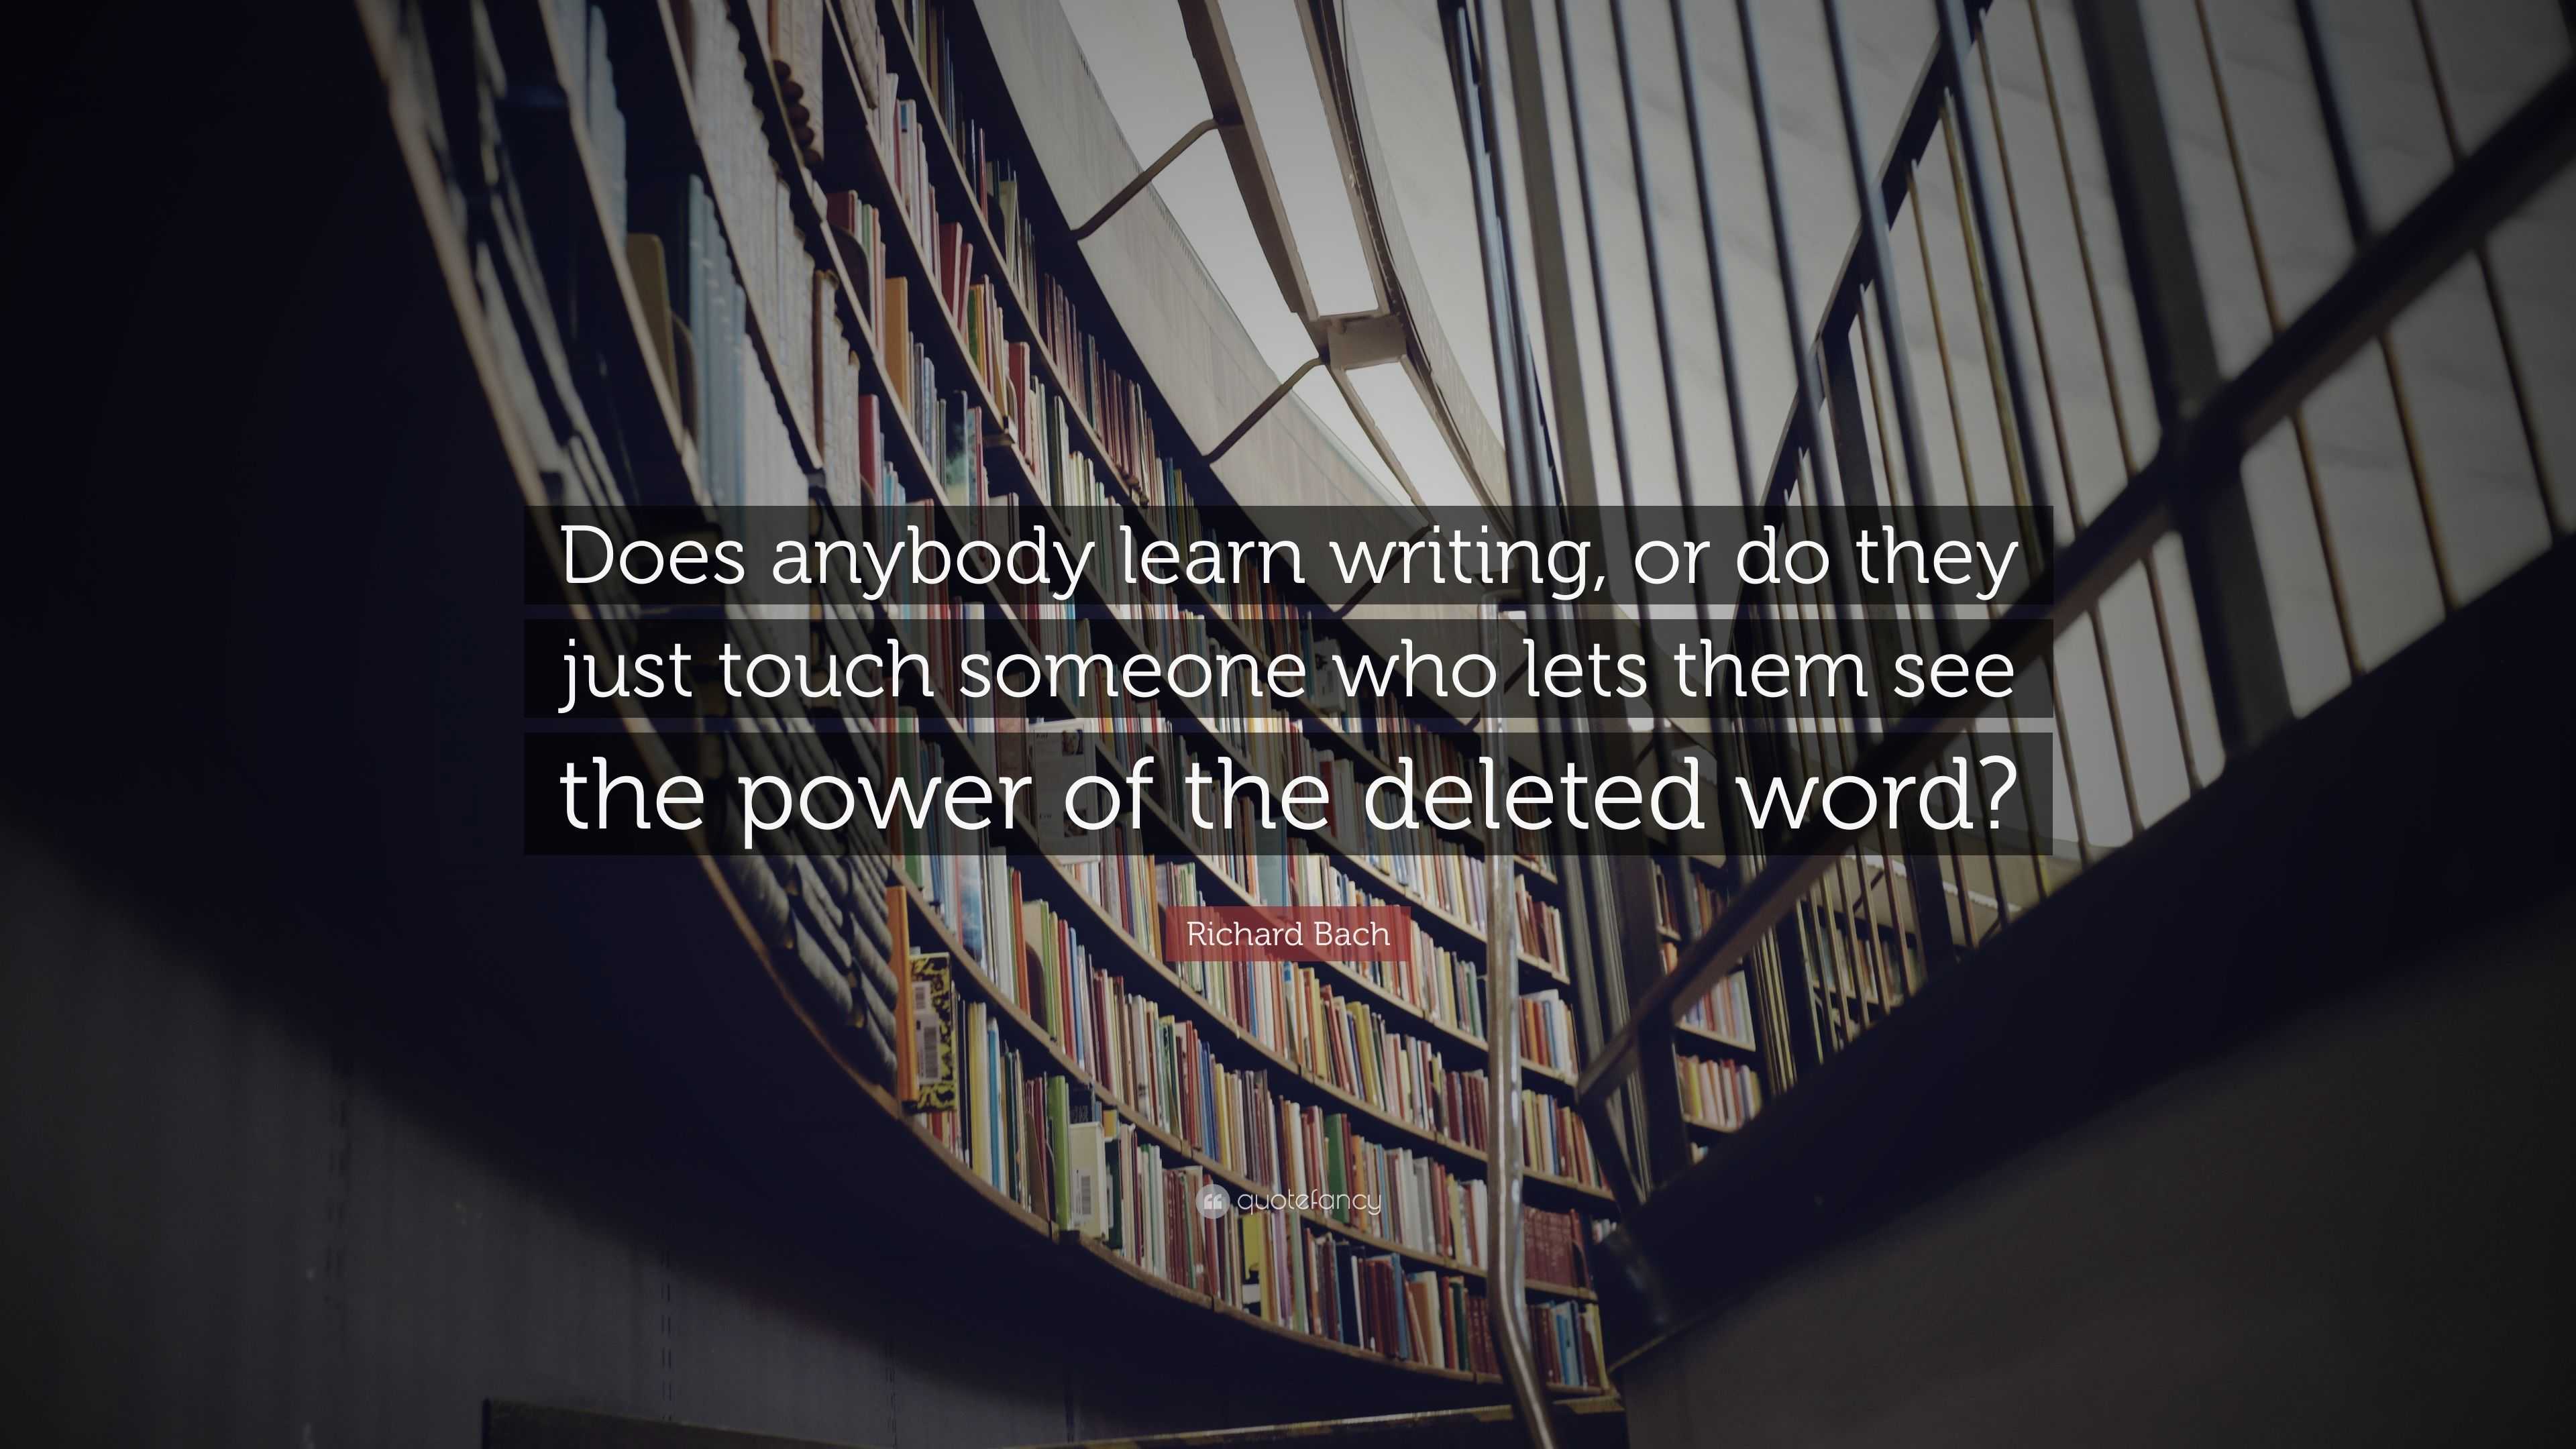 Richard Bach Quote: “Does anybody learn writing, or do they just